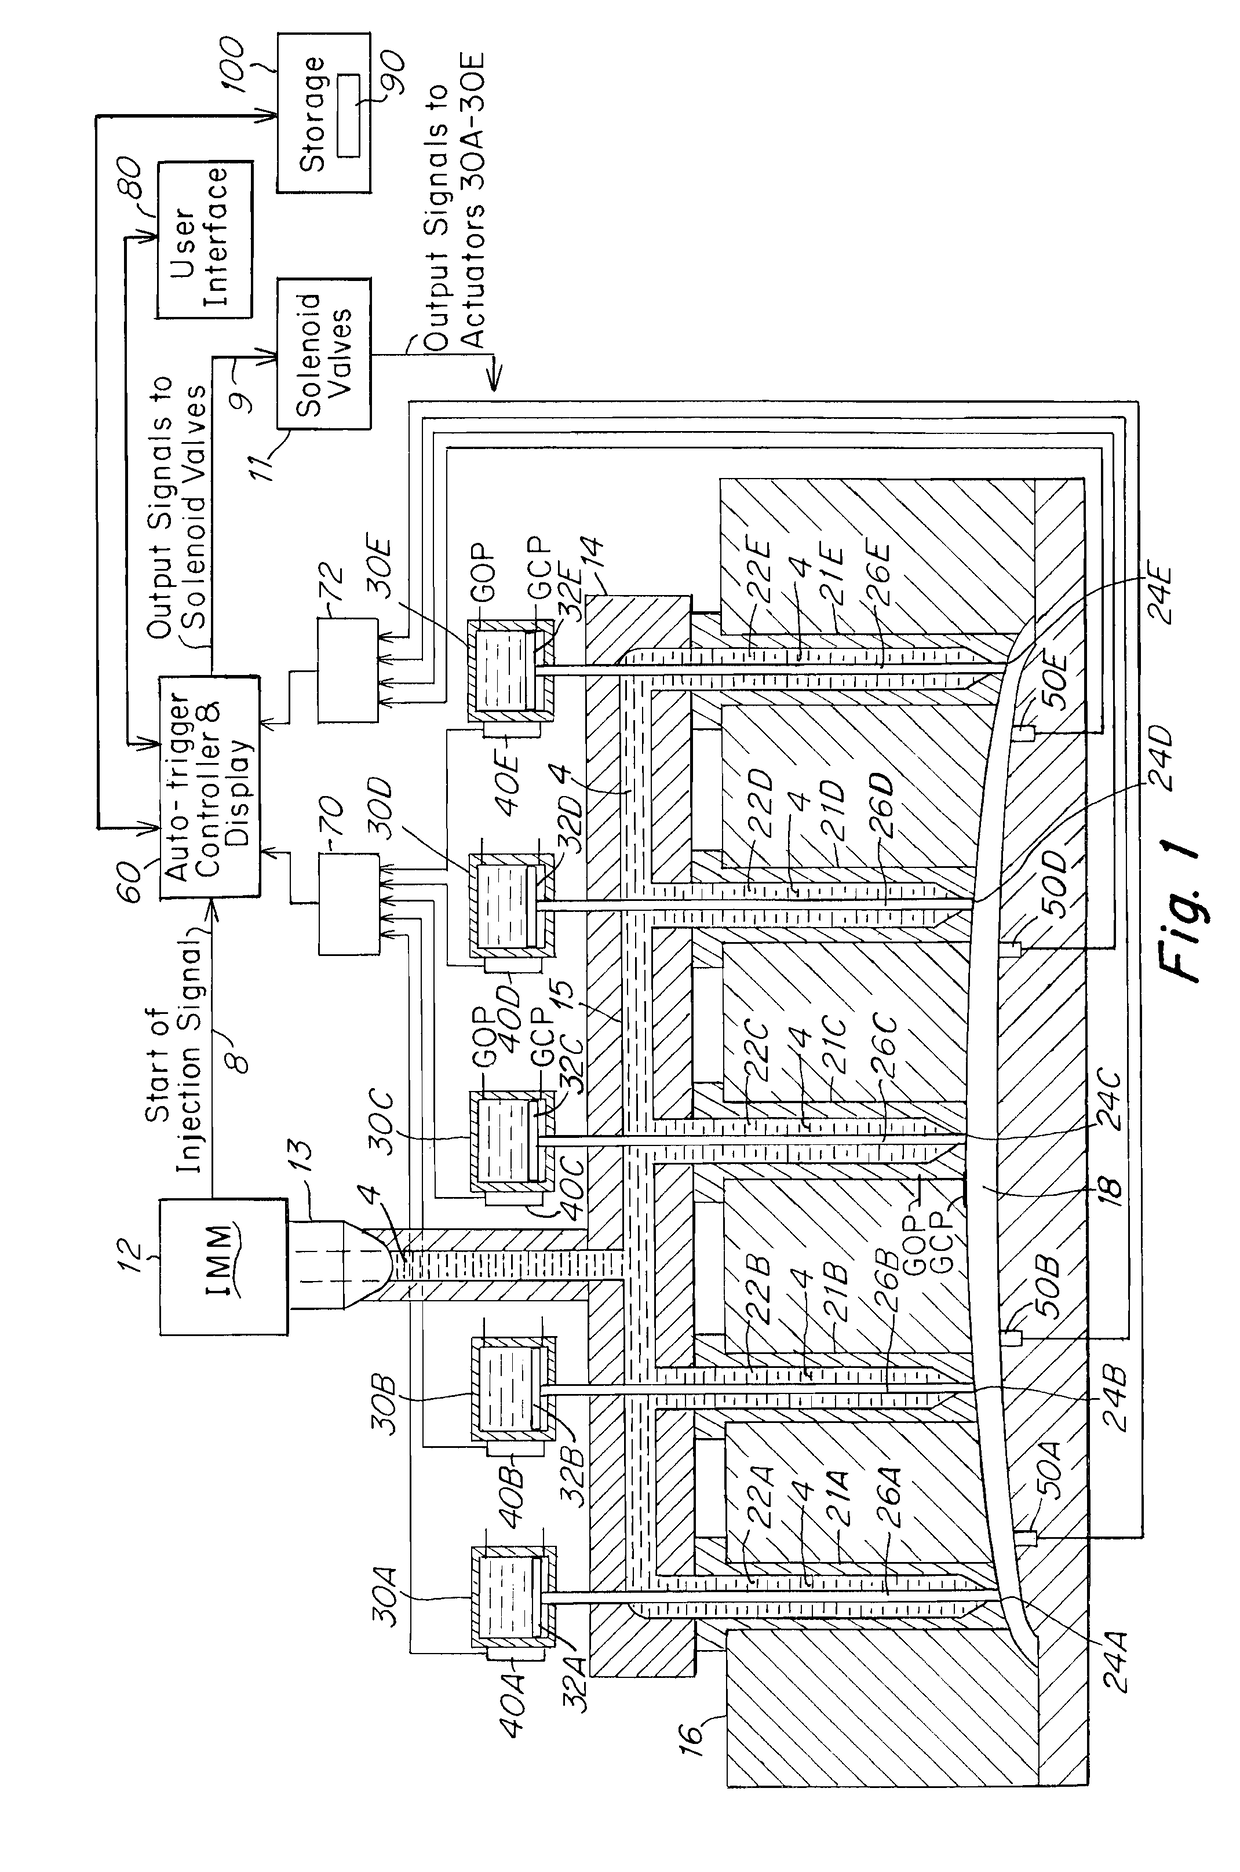 Injection molding apparatus and method for automatic cycle to cycle cavity injection